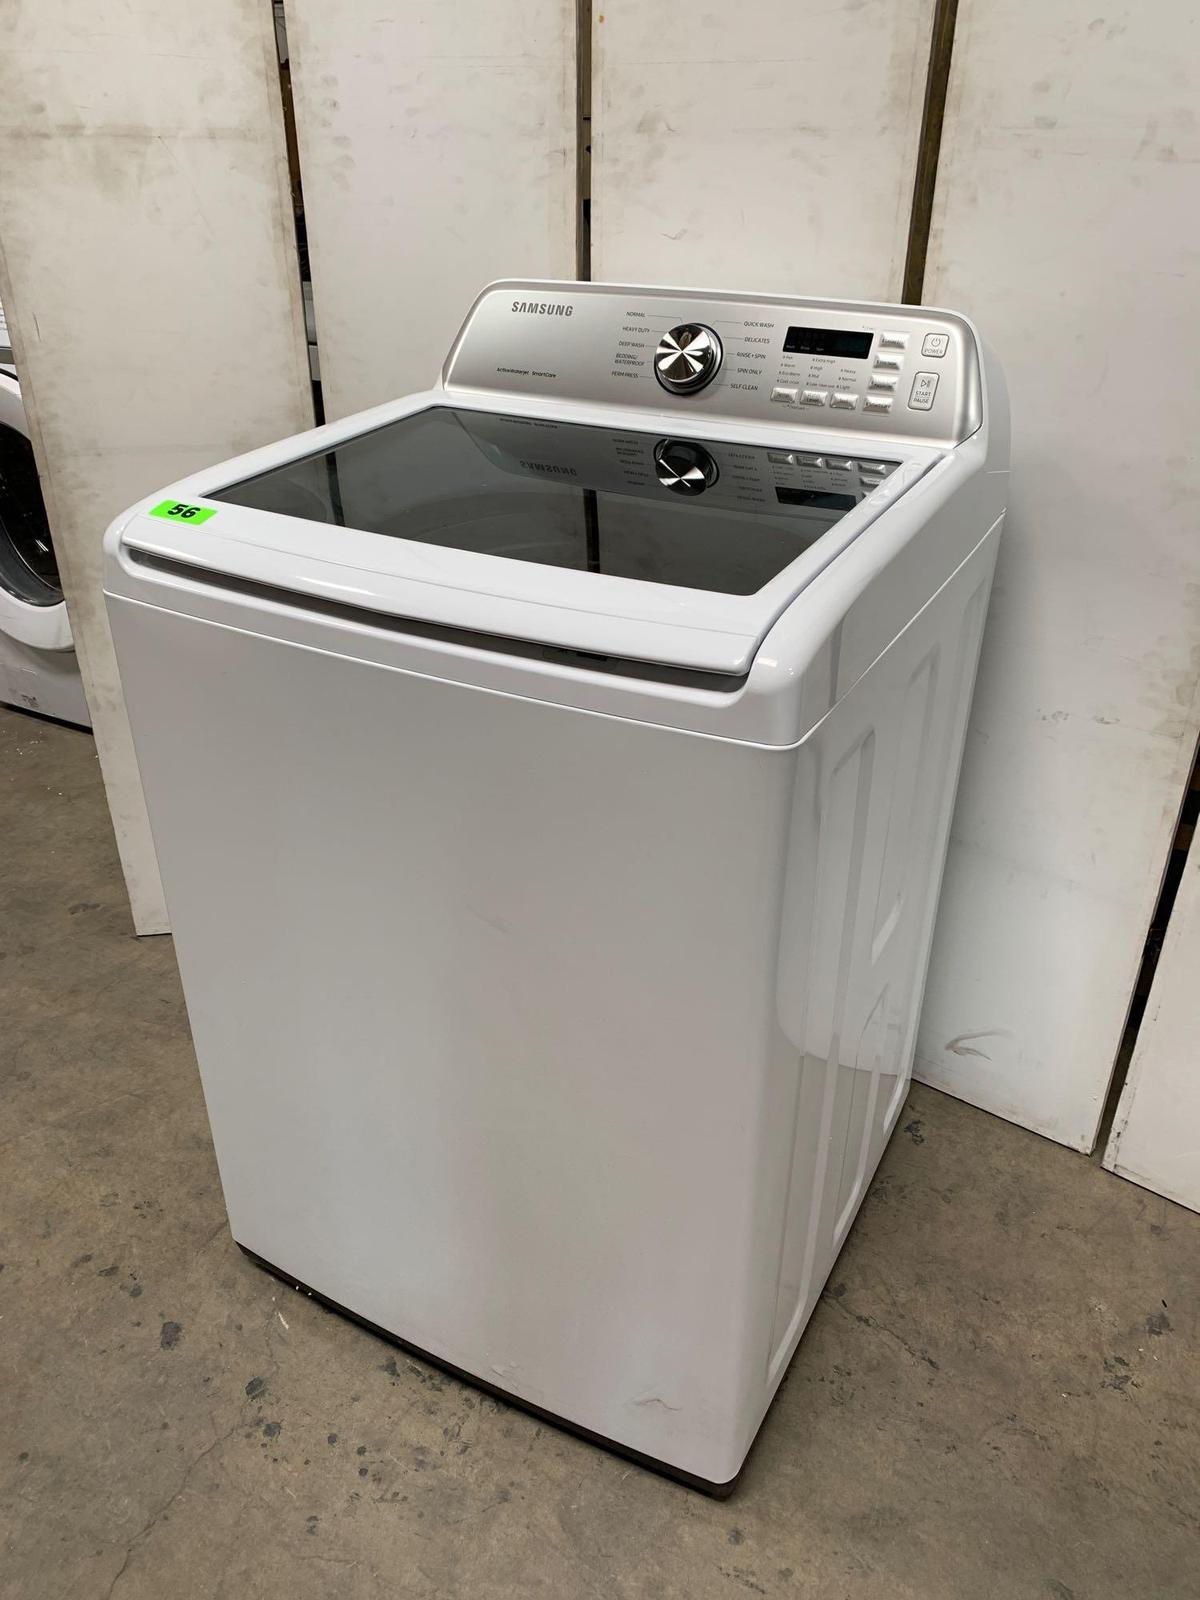 Samsung 4.5 cu. ft. High Efficiency Top Load Electric Washer